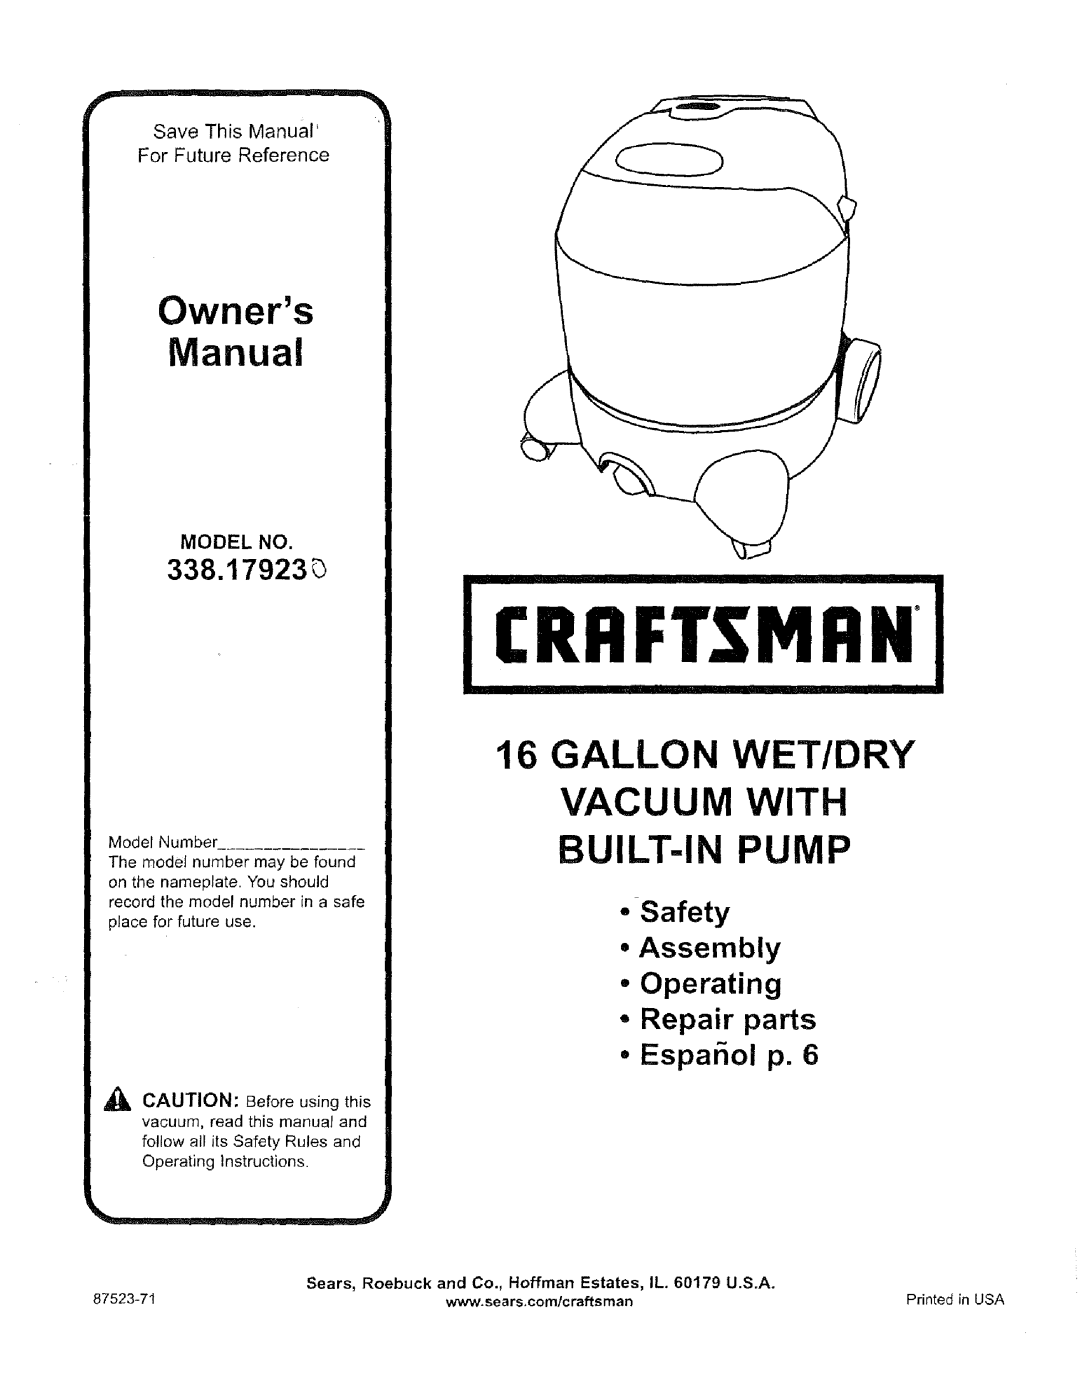 Craftsman 338.17923 owner manual o-Safety Assembly, QRepair parts, Model No, Craft.Tmfin, Owners Manual, Operating 